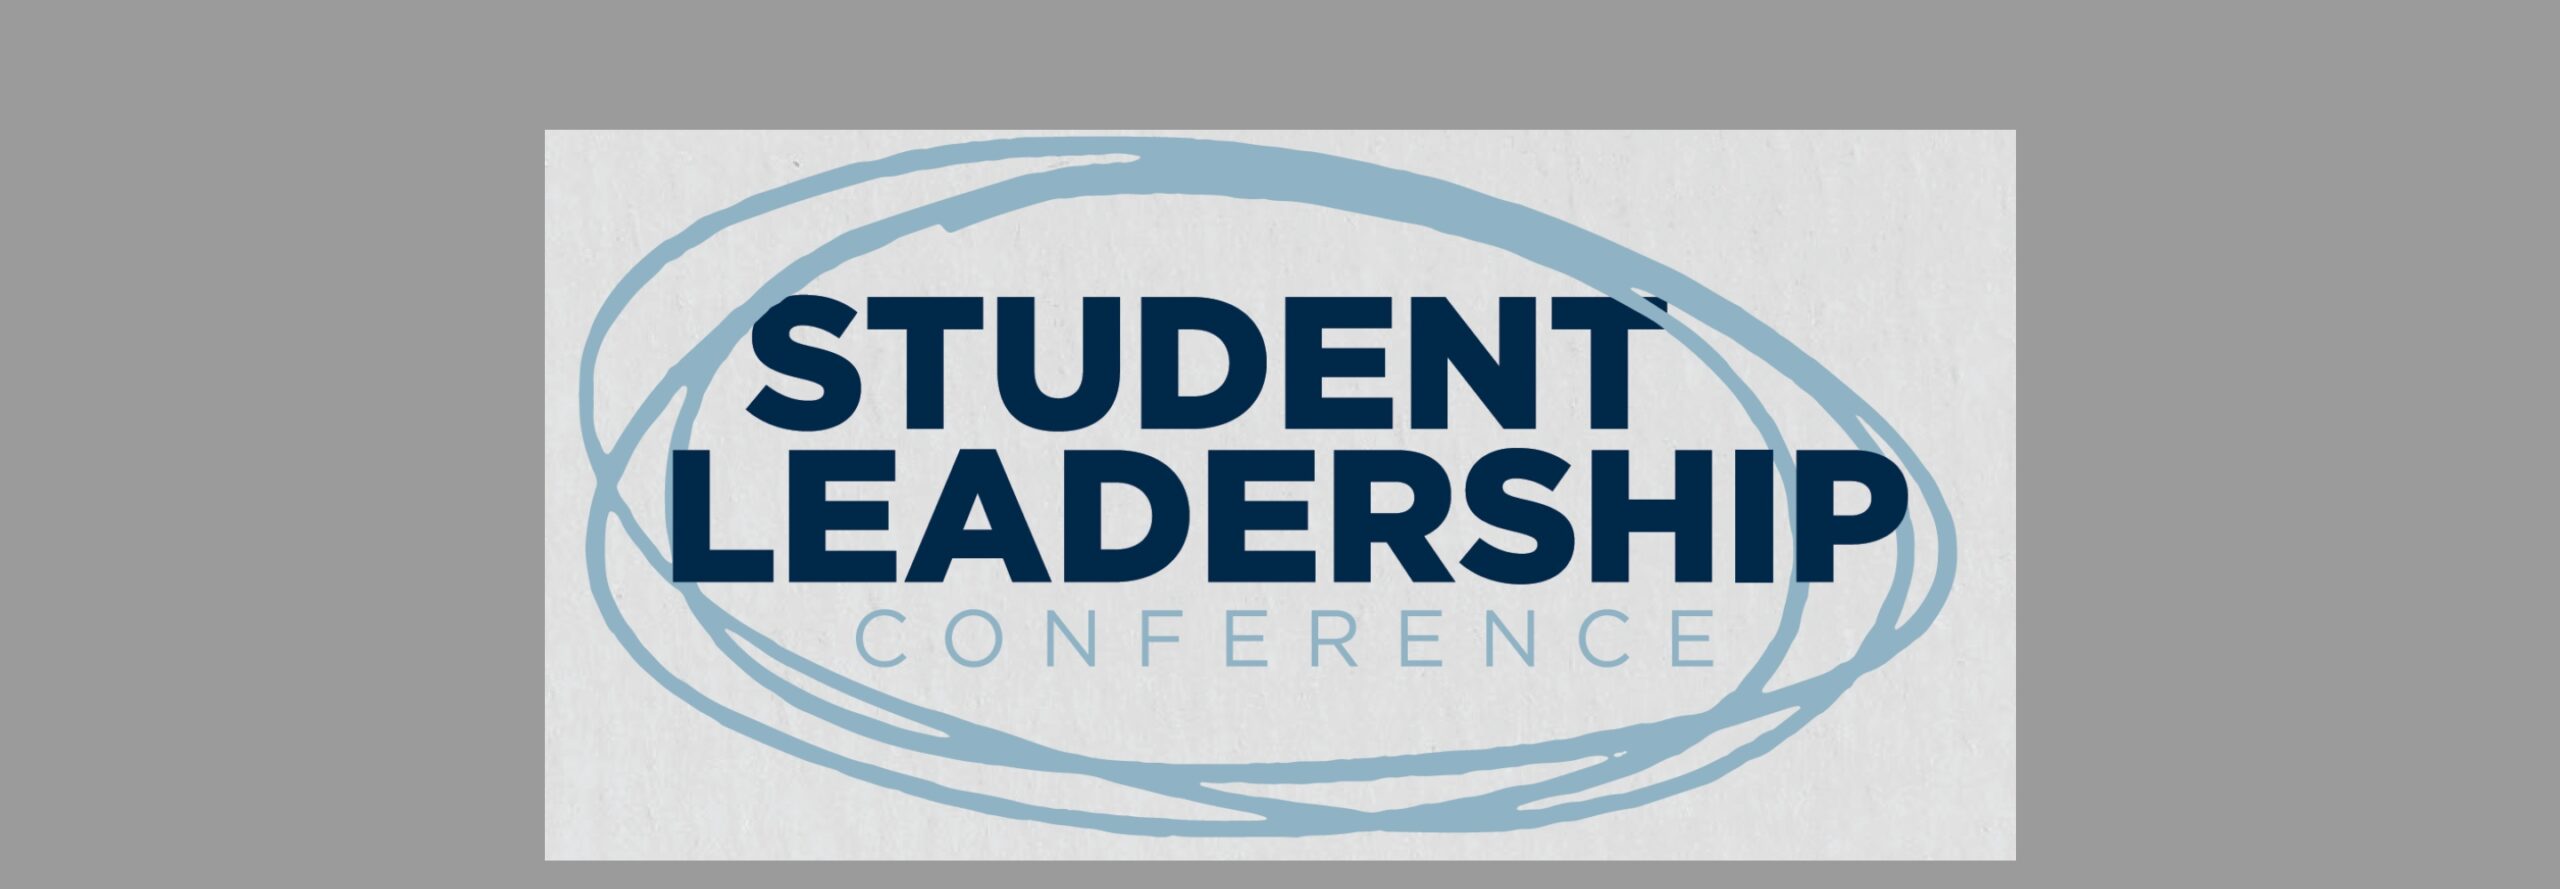 Student Leadership Conference